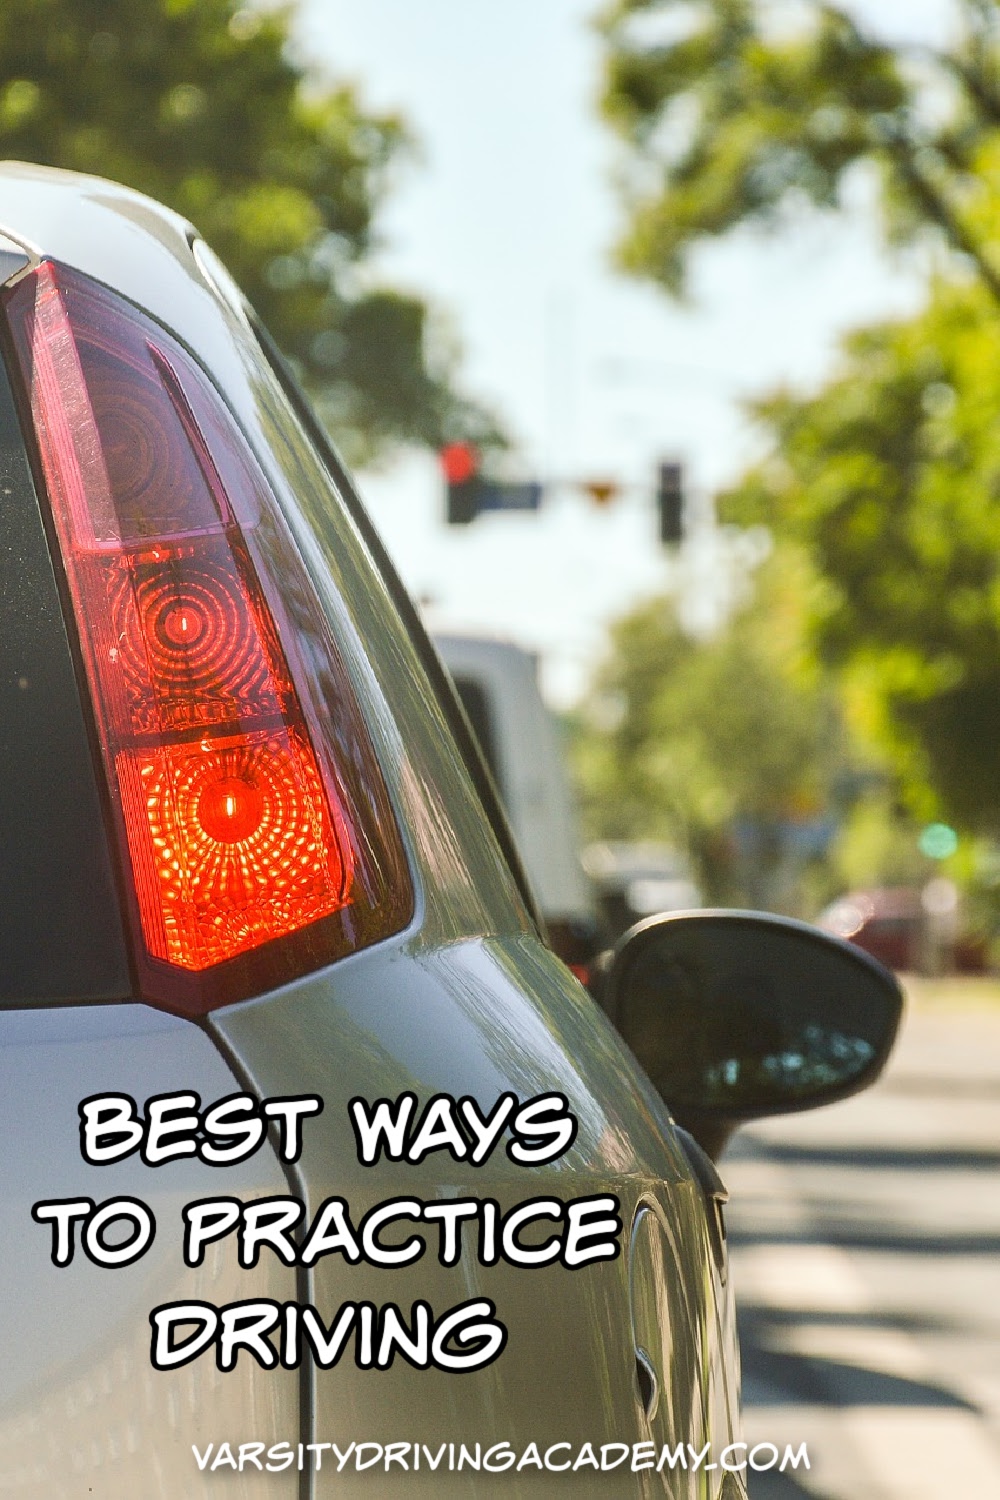 Use the best ways to practice driving before you head off to the DMV to make sure you’re fully prepared to pass your driver’s test.